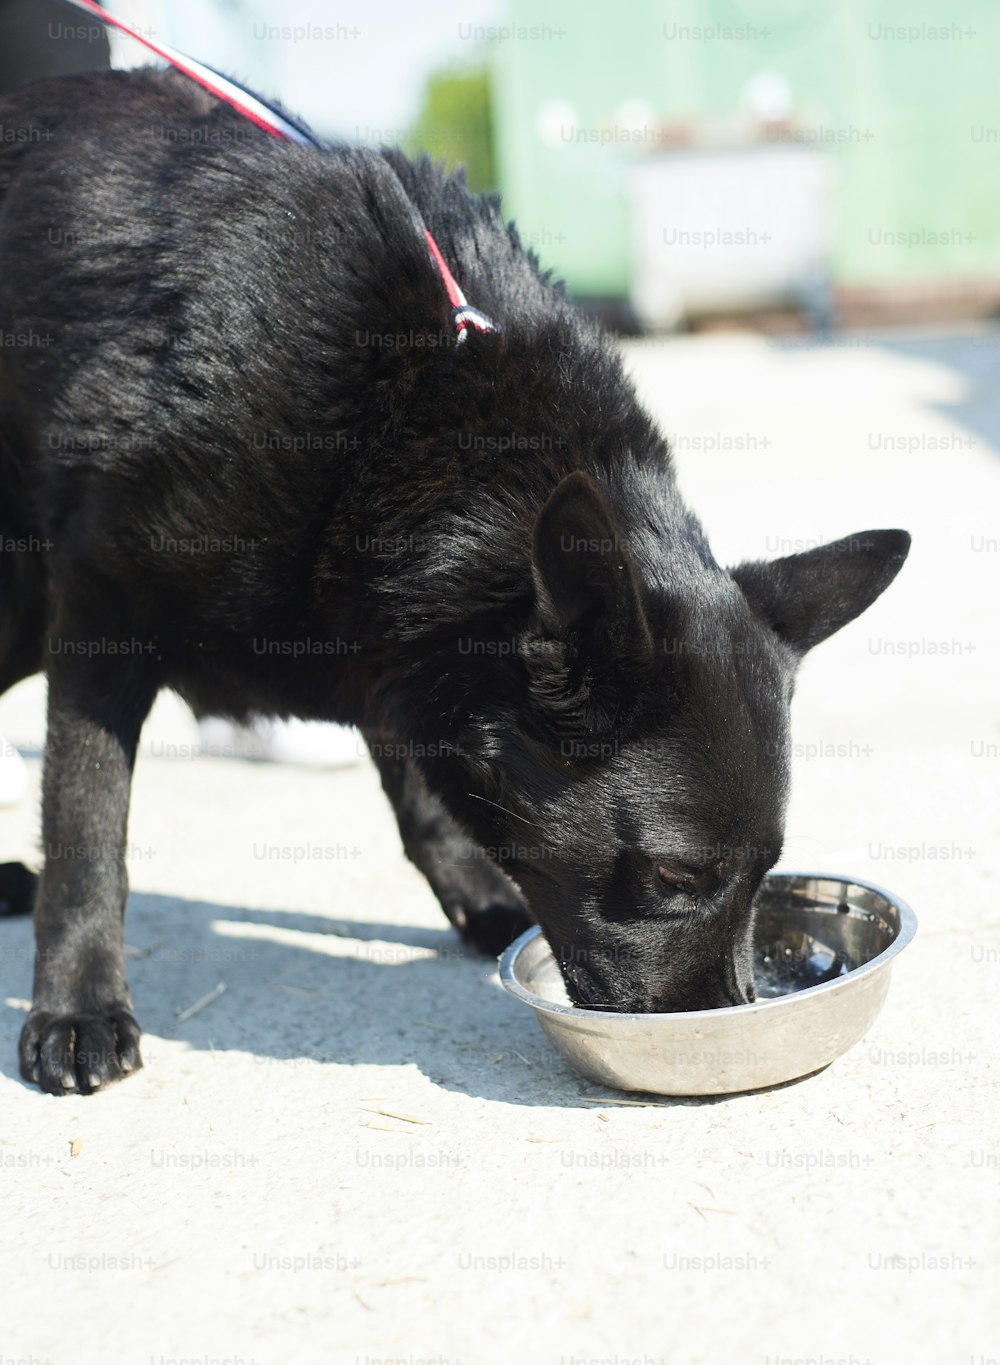 Cute dog outside eating his food from the bowl